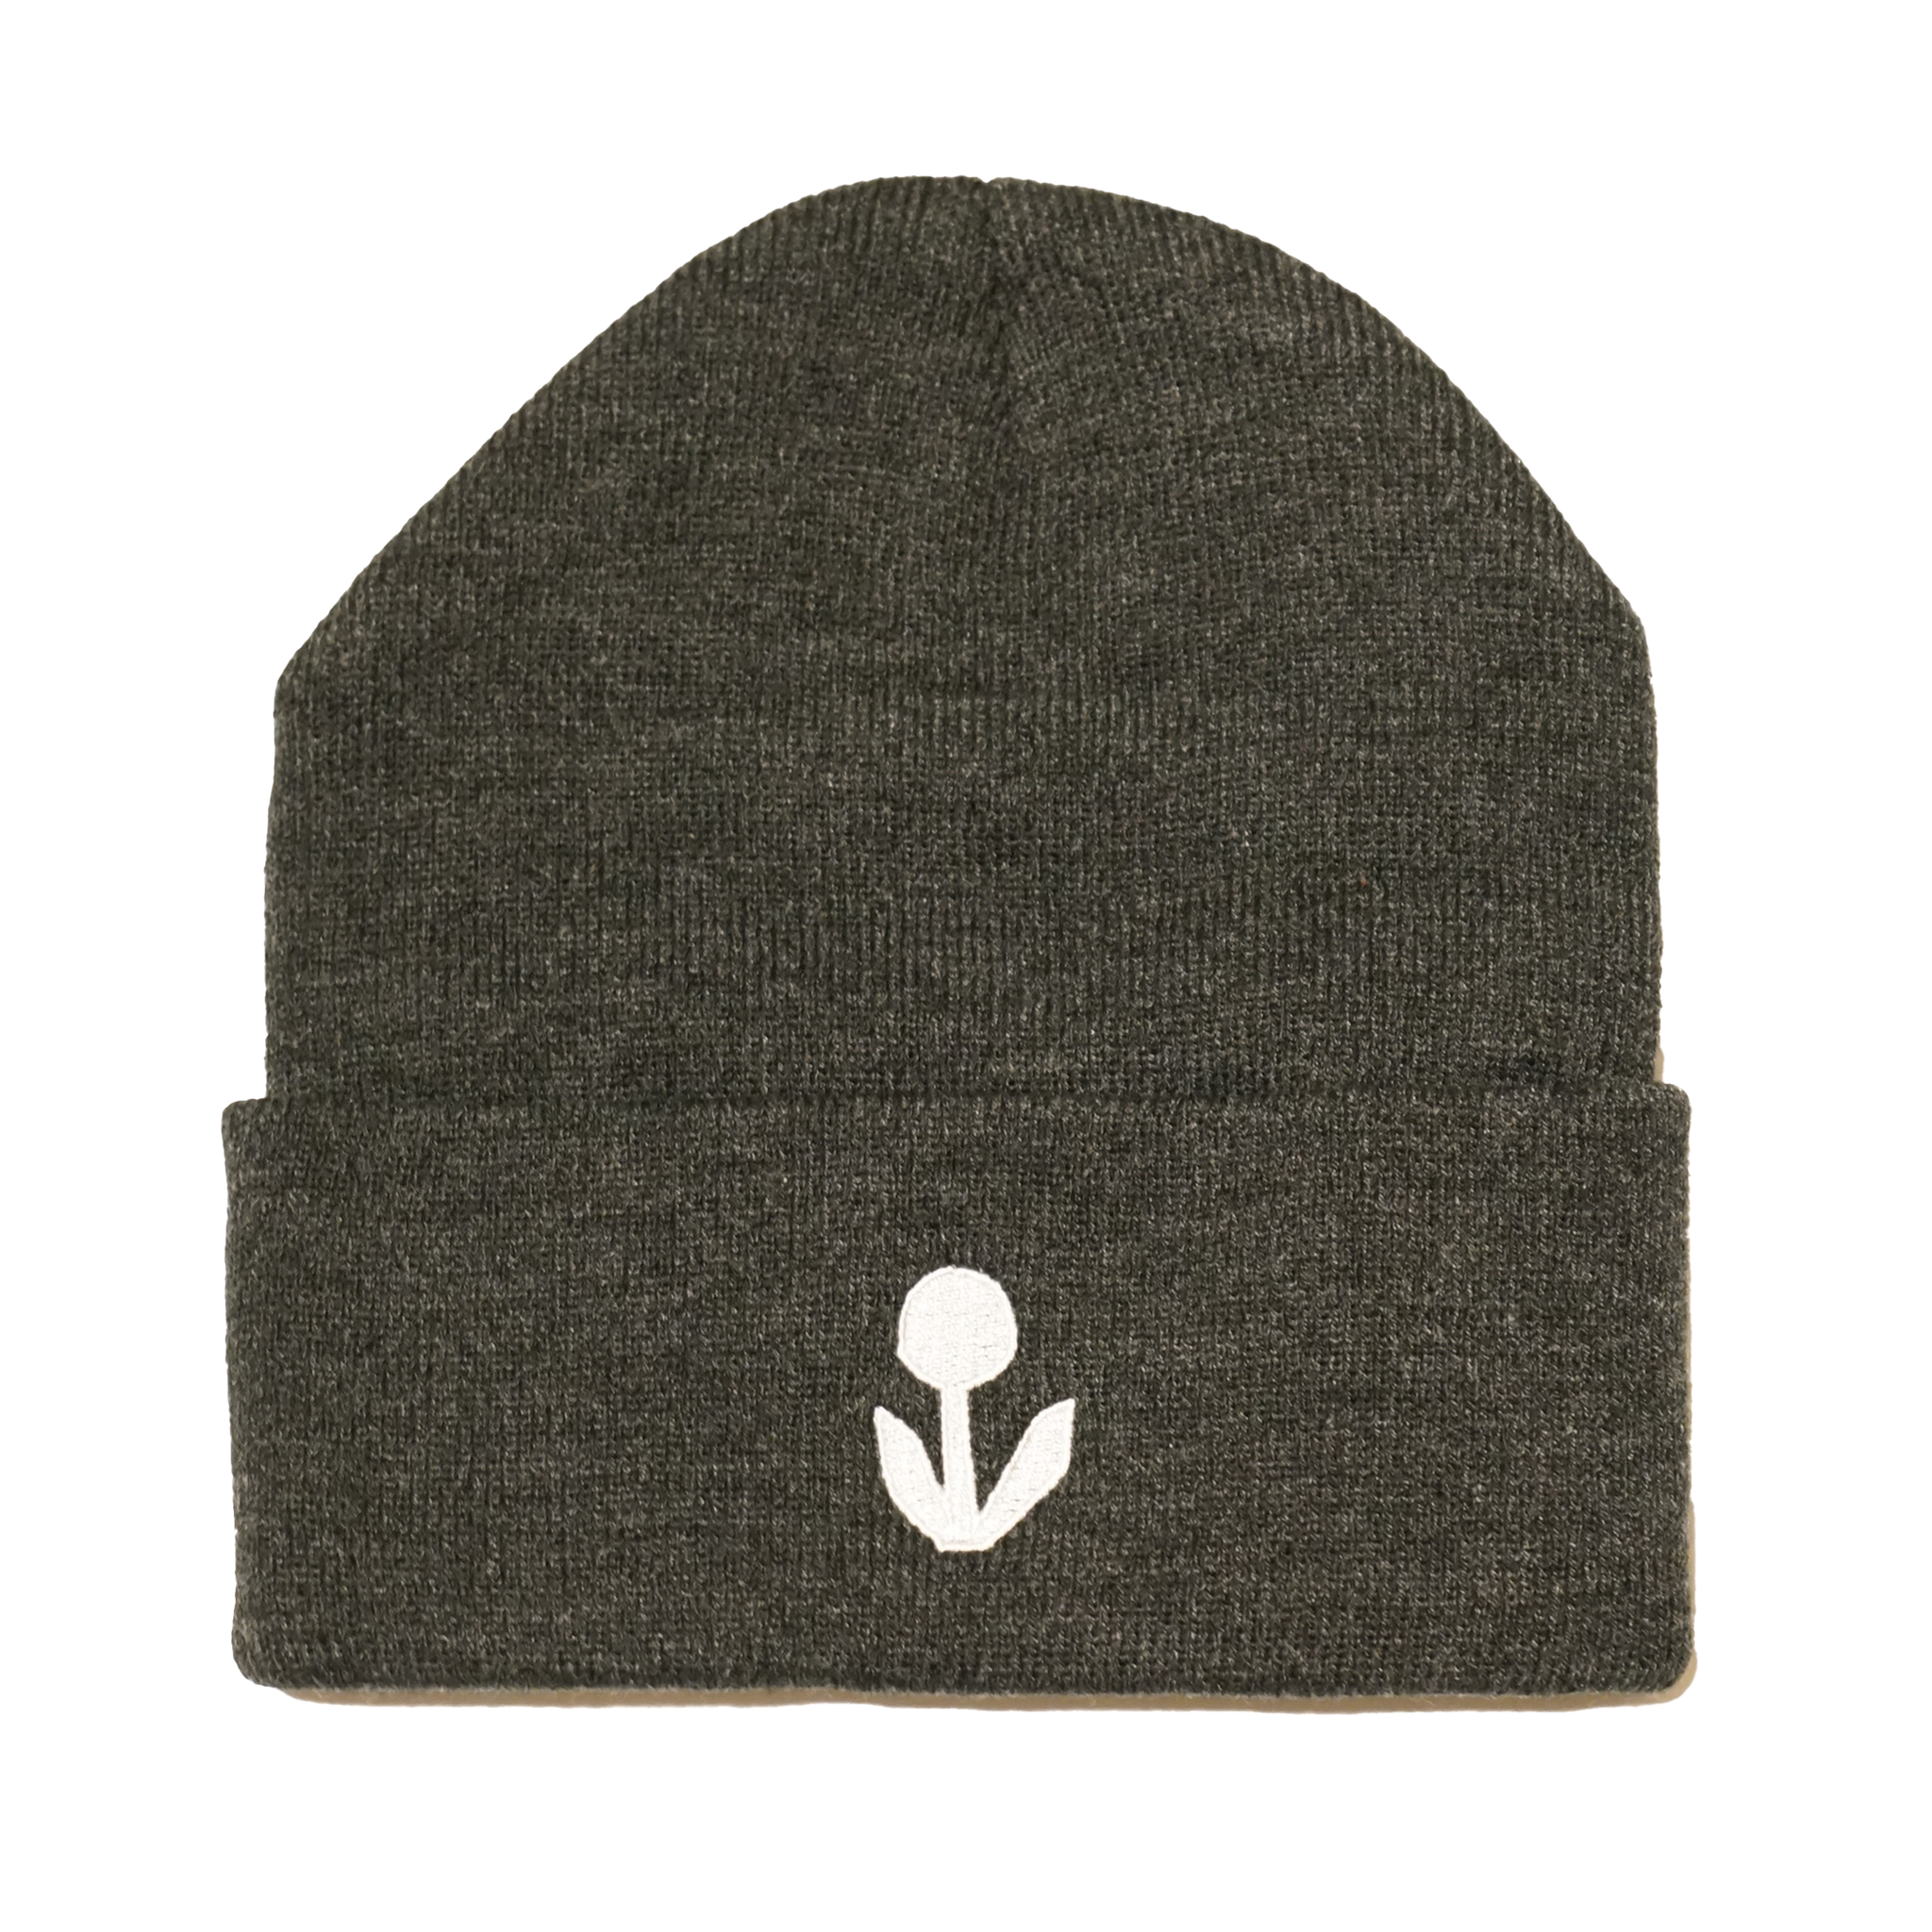 Embroidered Grey Beanie